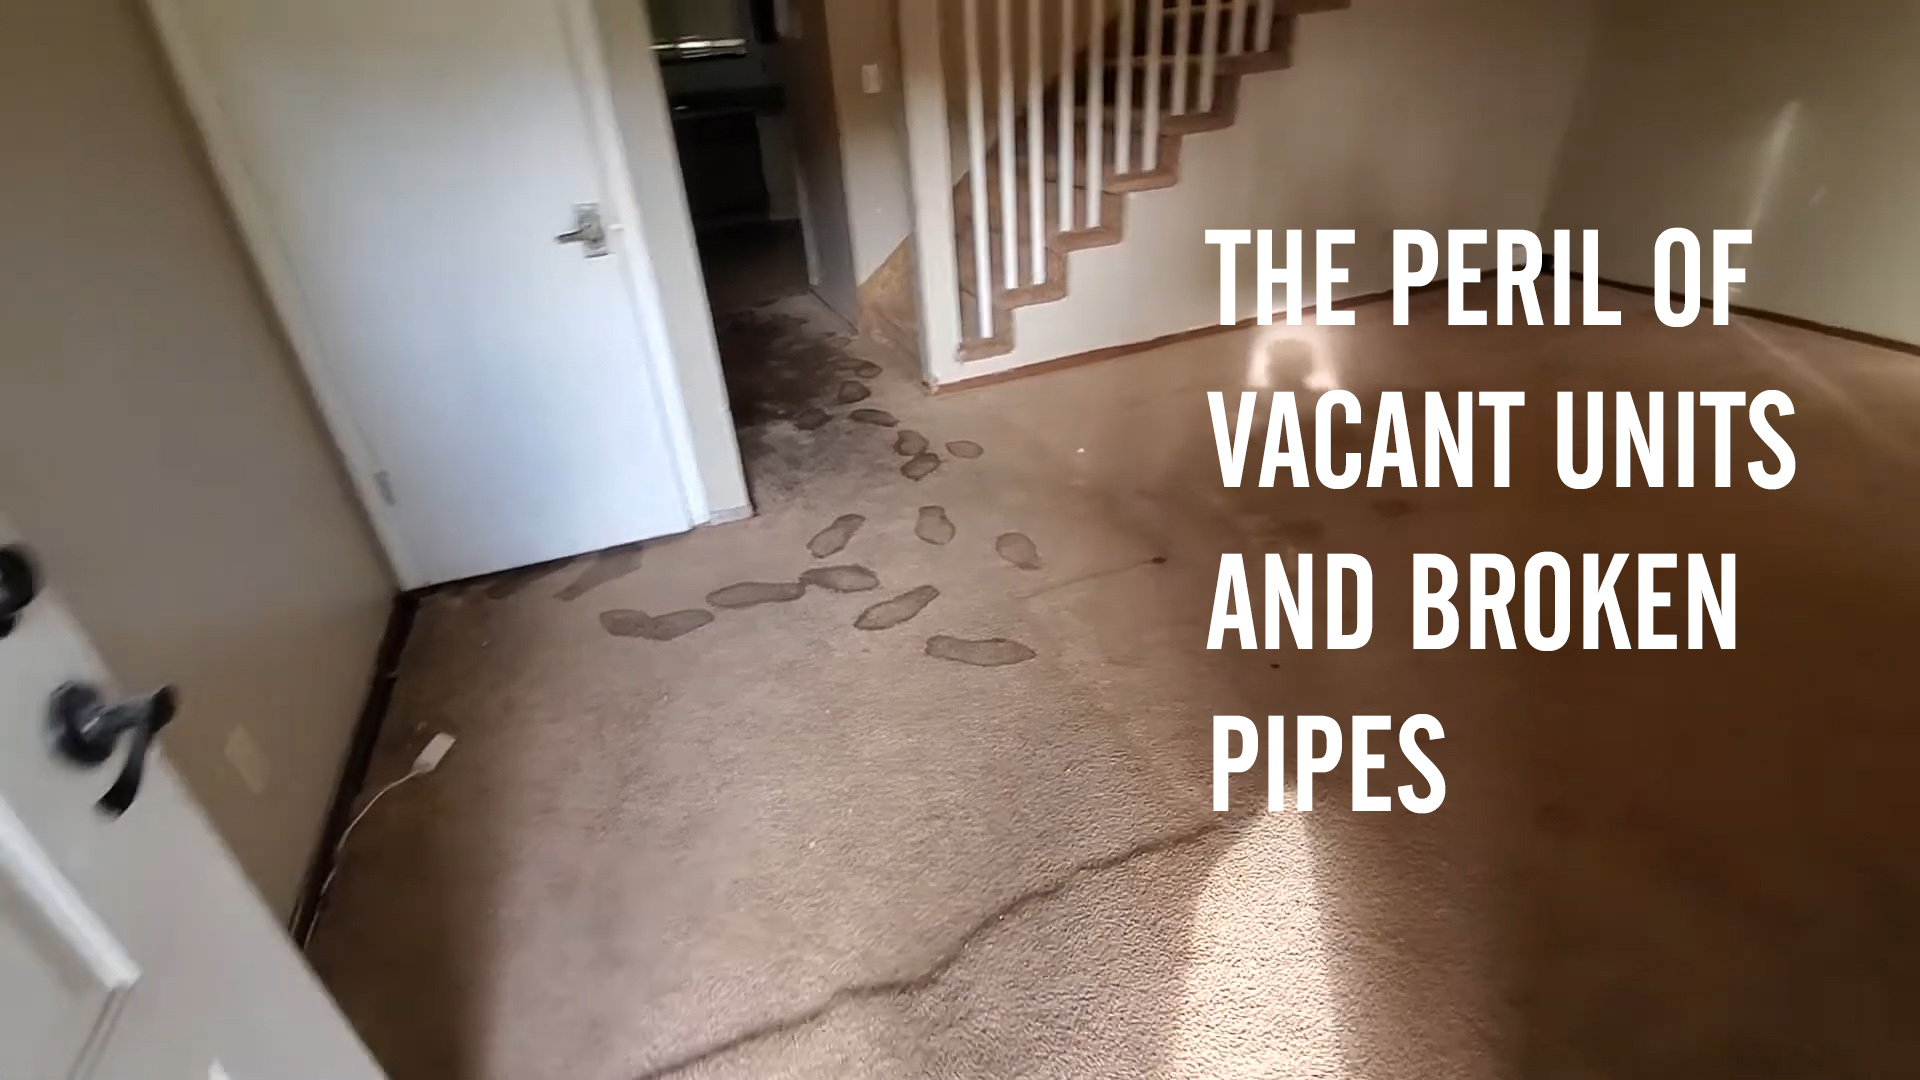 VIDEO:  The Peril of Vacant Units and Broken Pipes